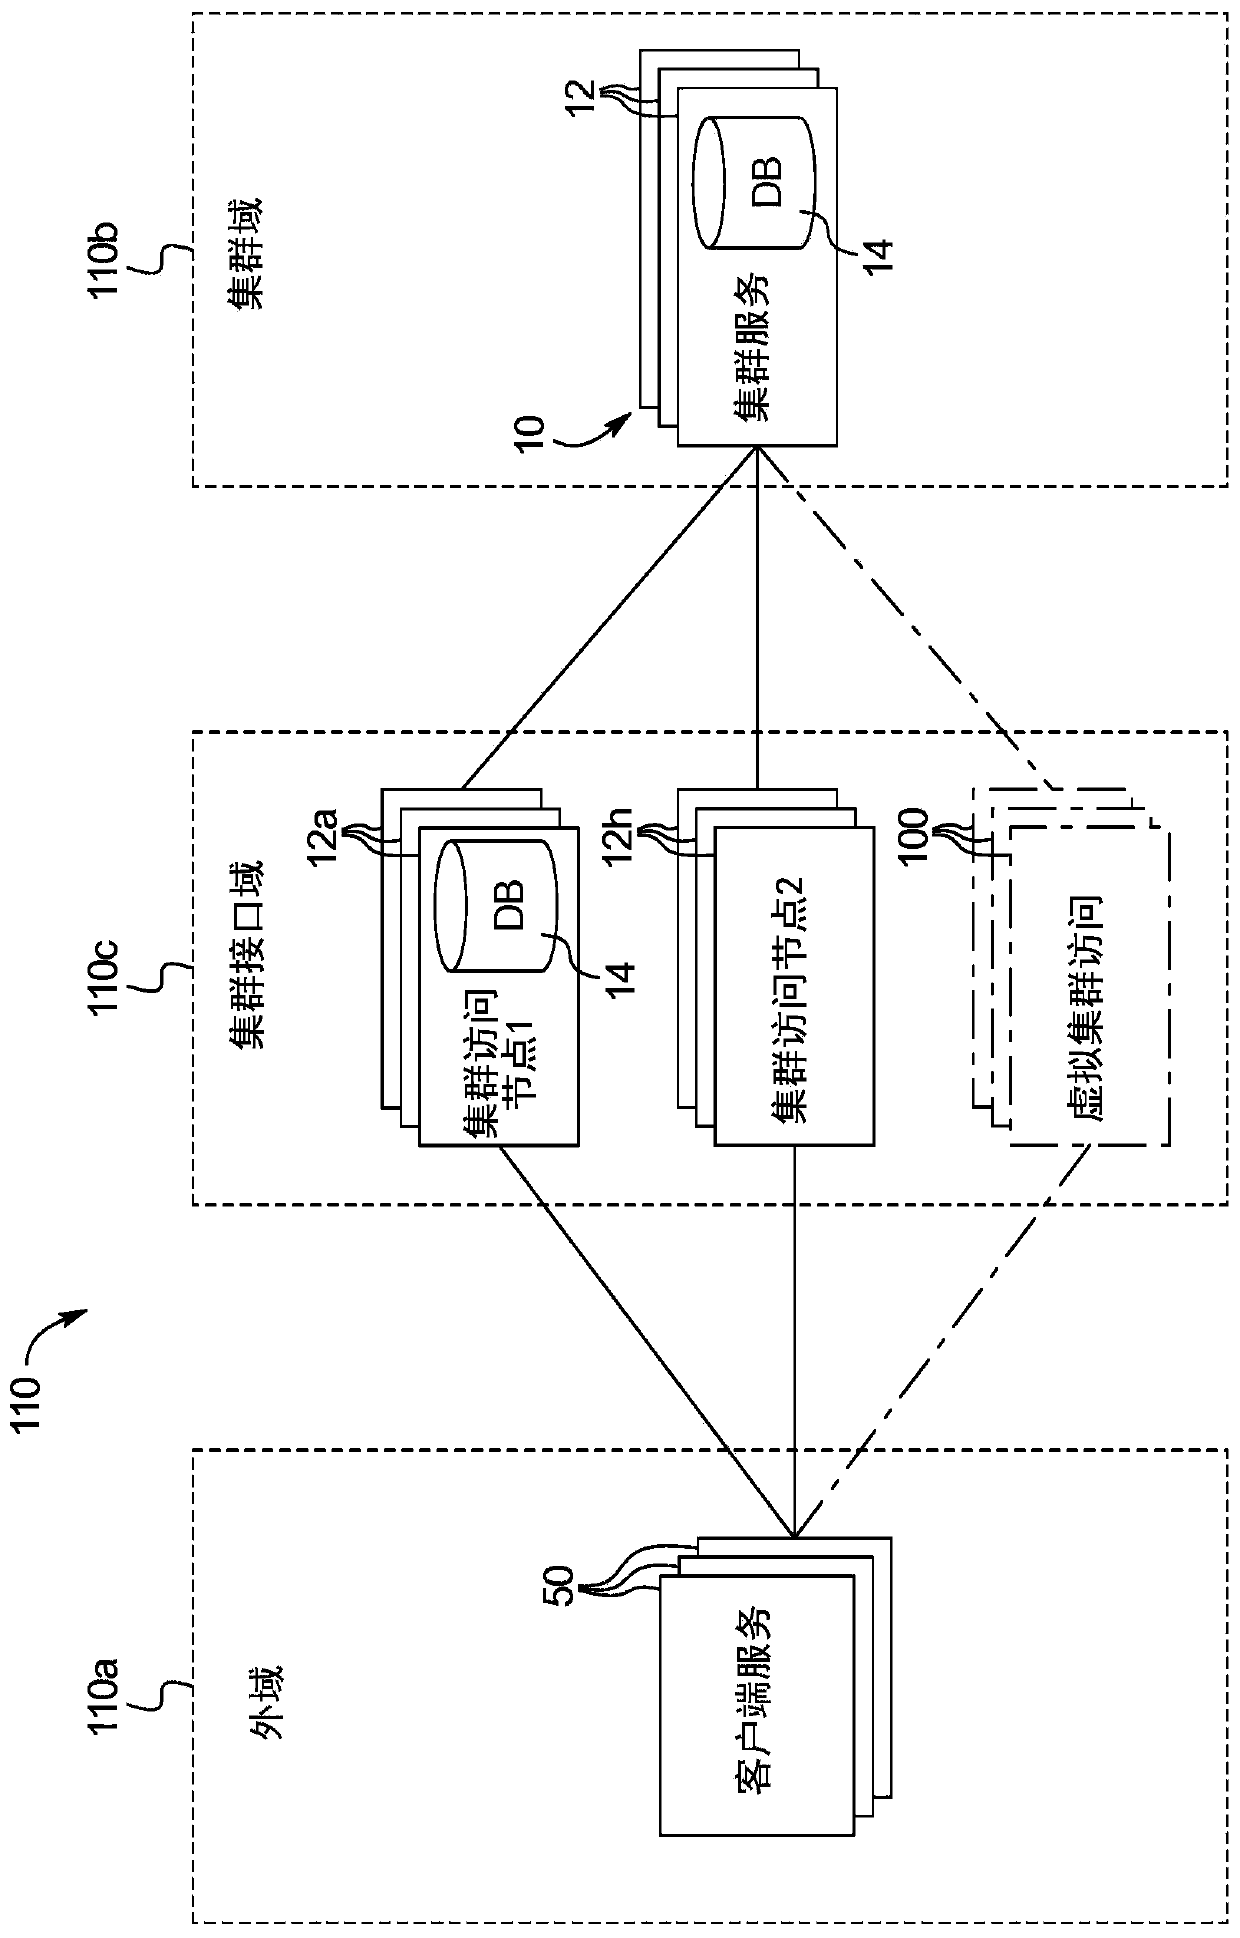 Medical device system including information technology infrastructure having secure cluster domain supporting external domain